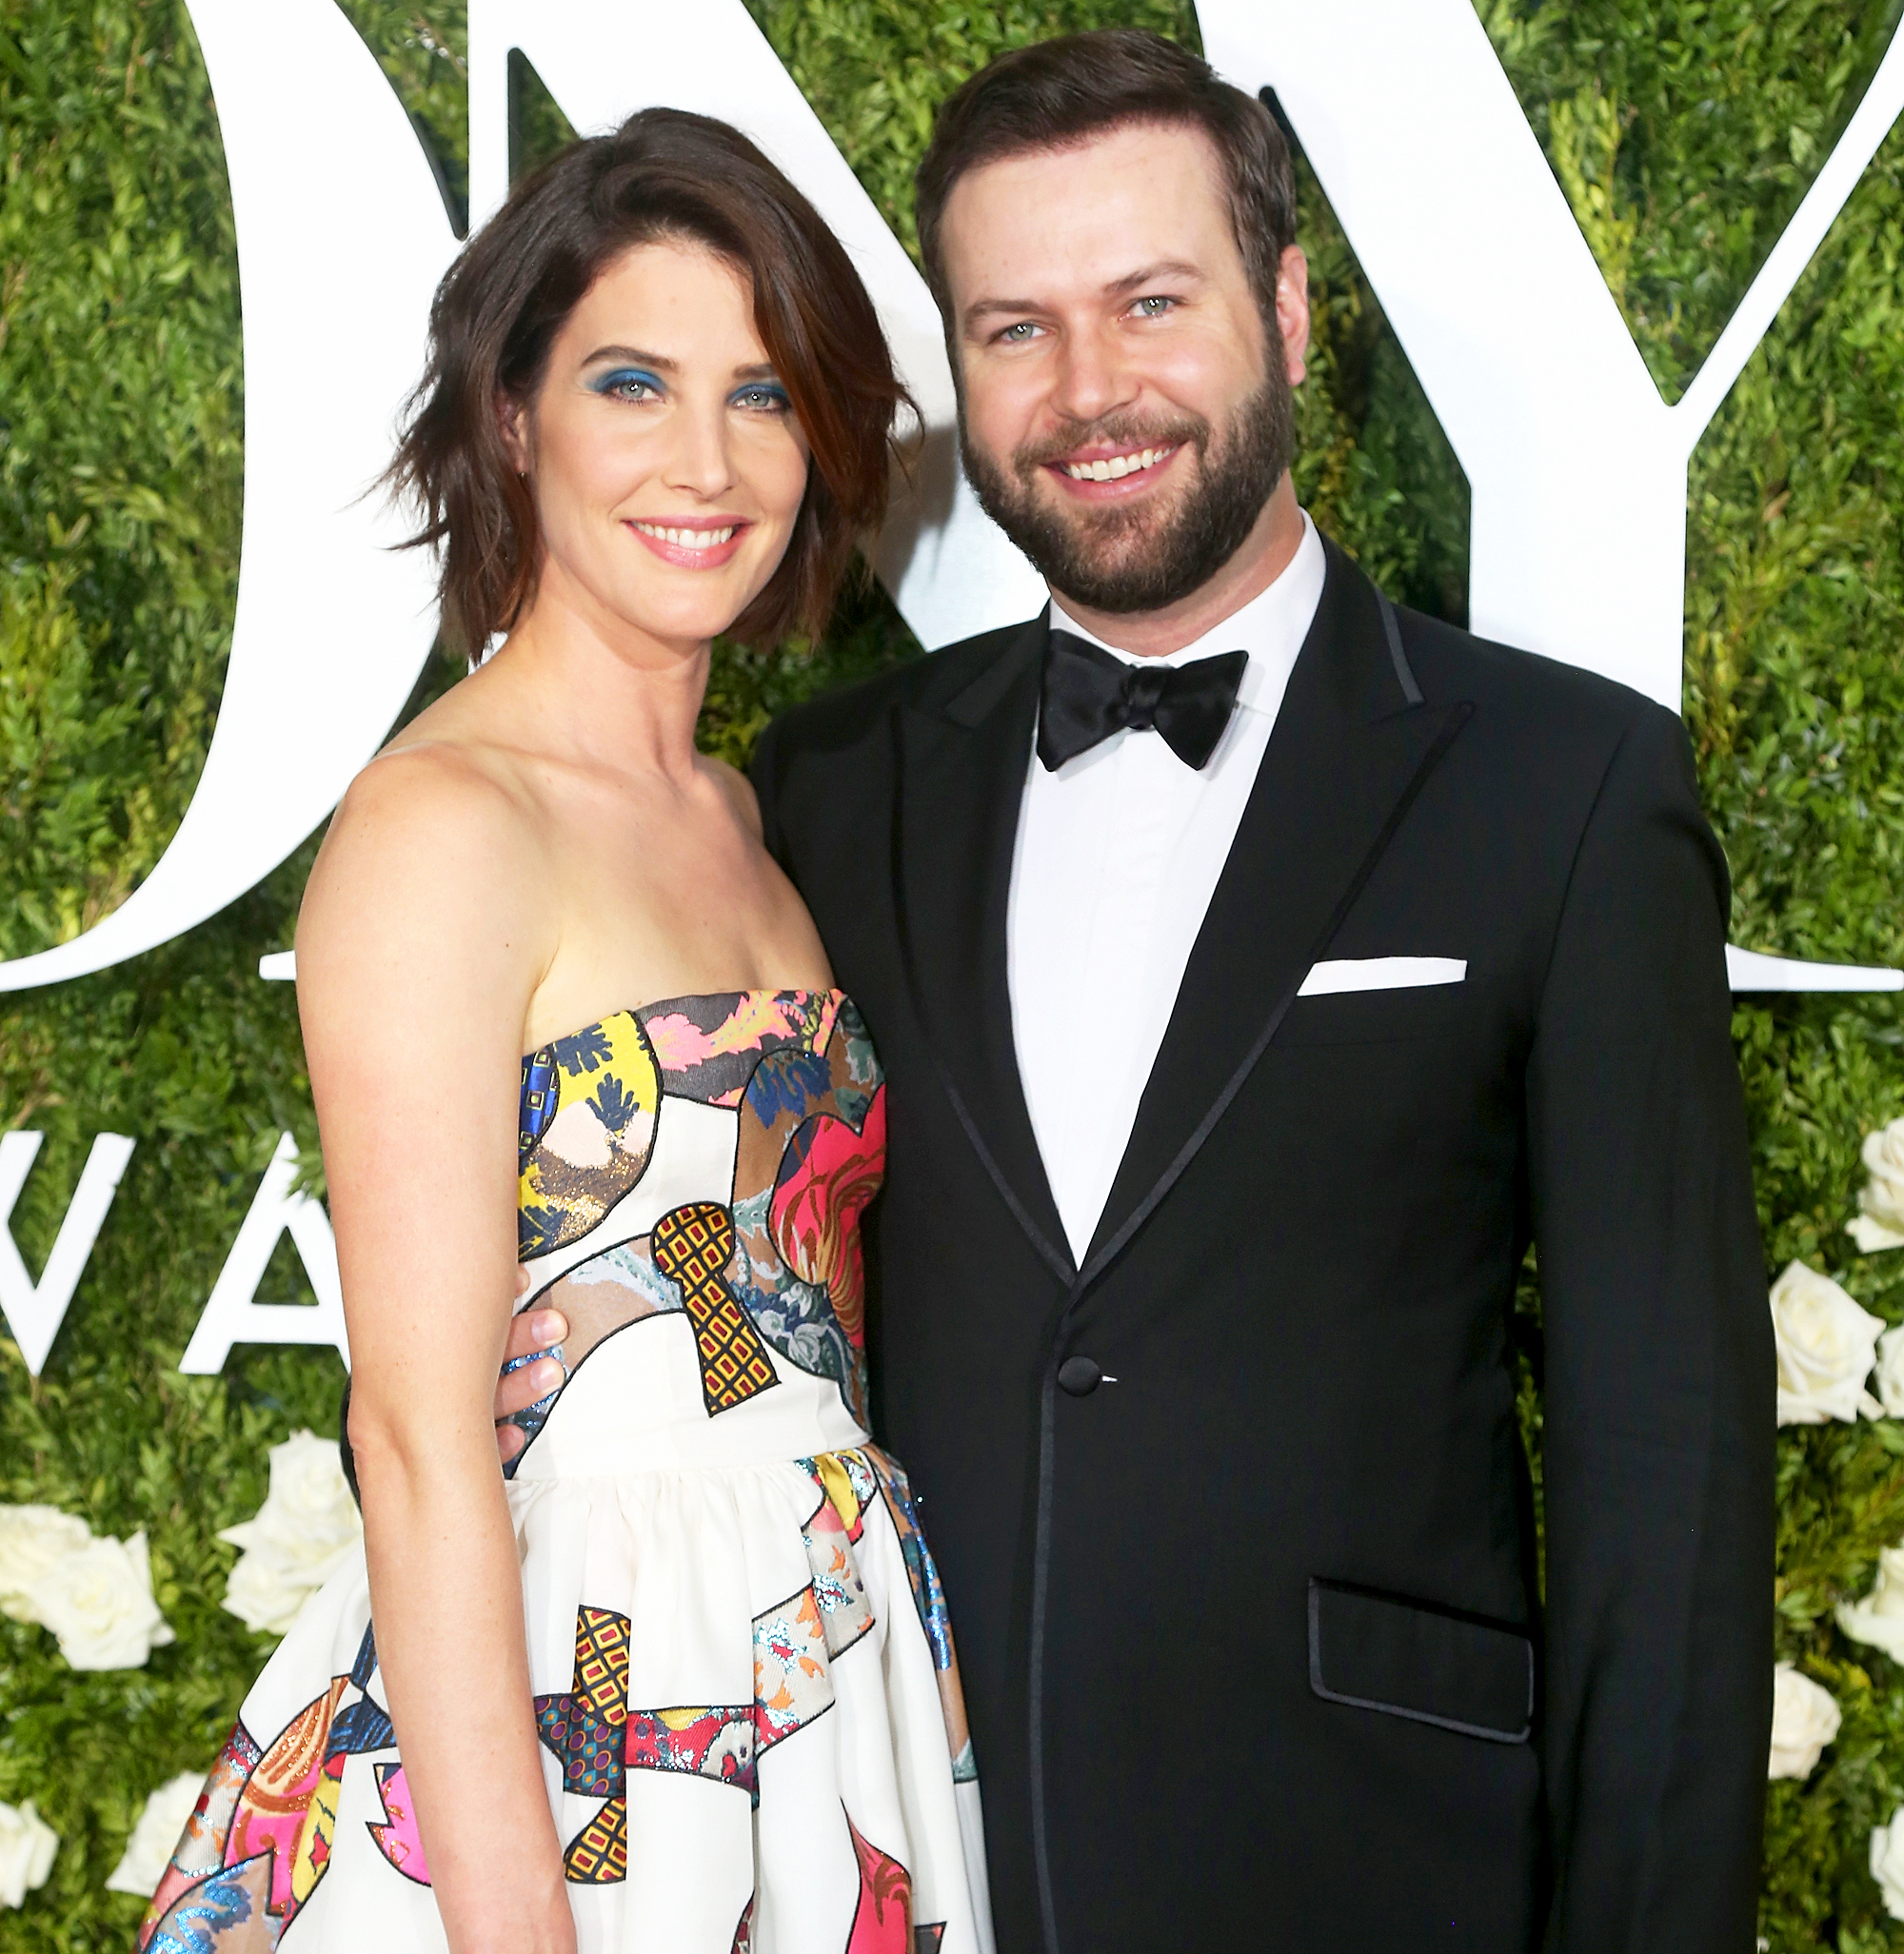 Taran Killam on When He Fell in Love With Cobie Smulders